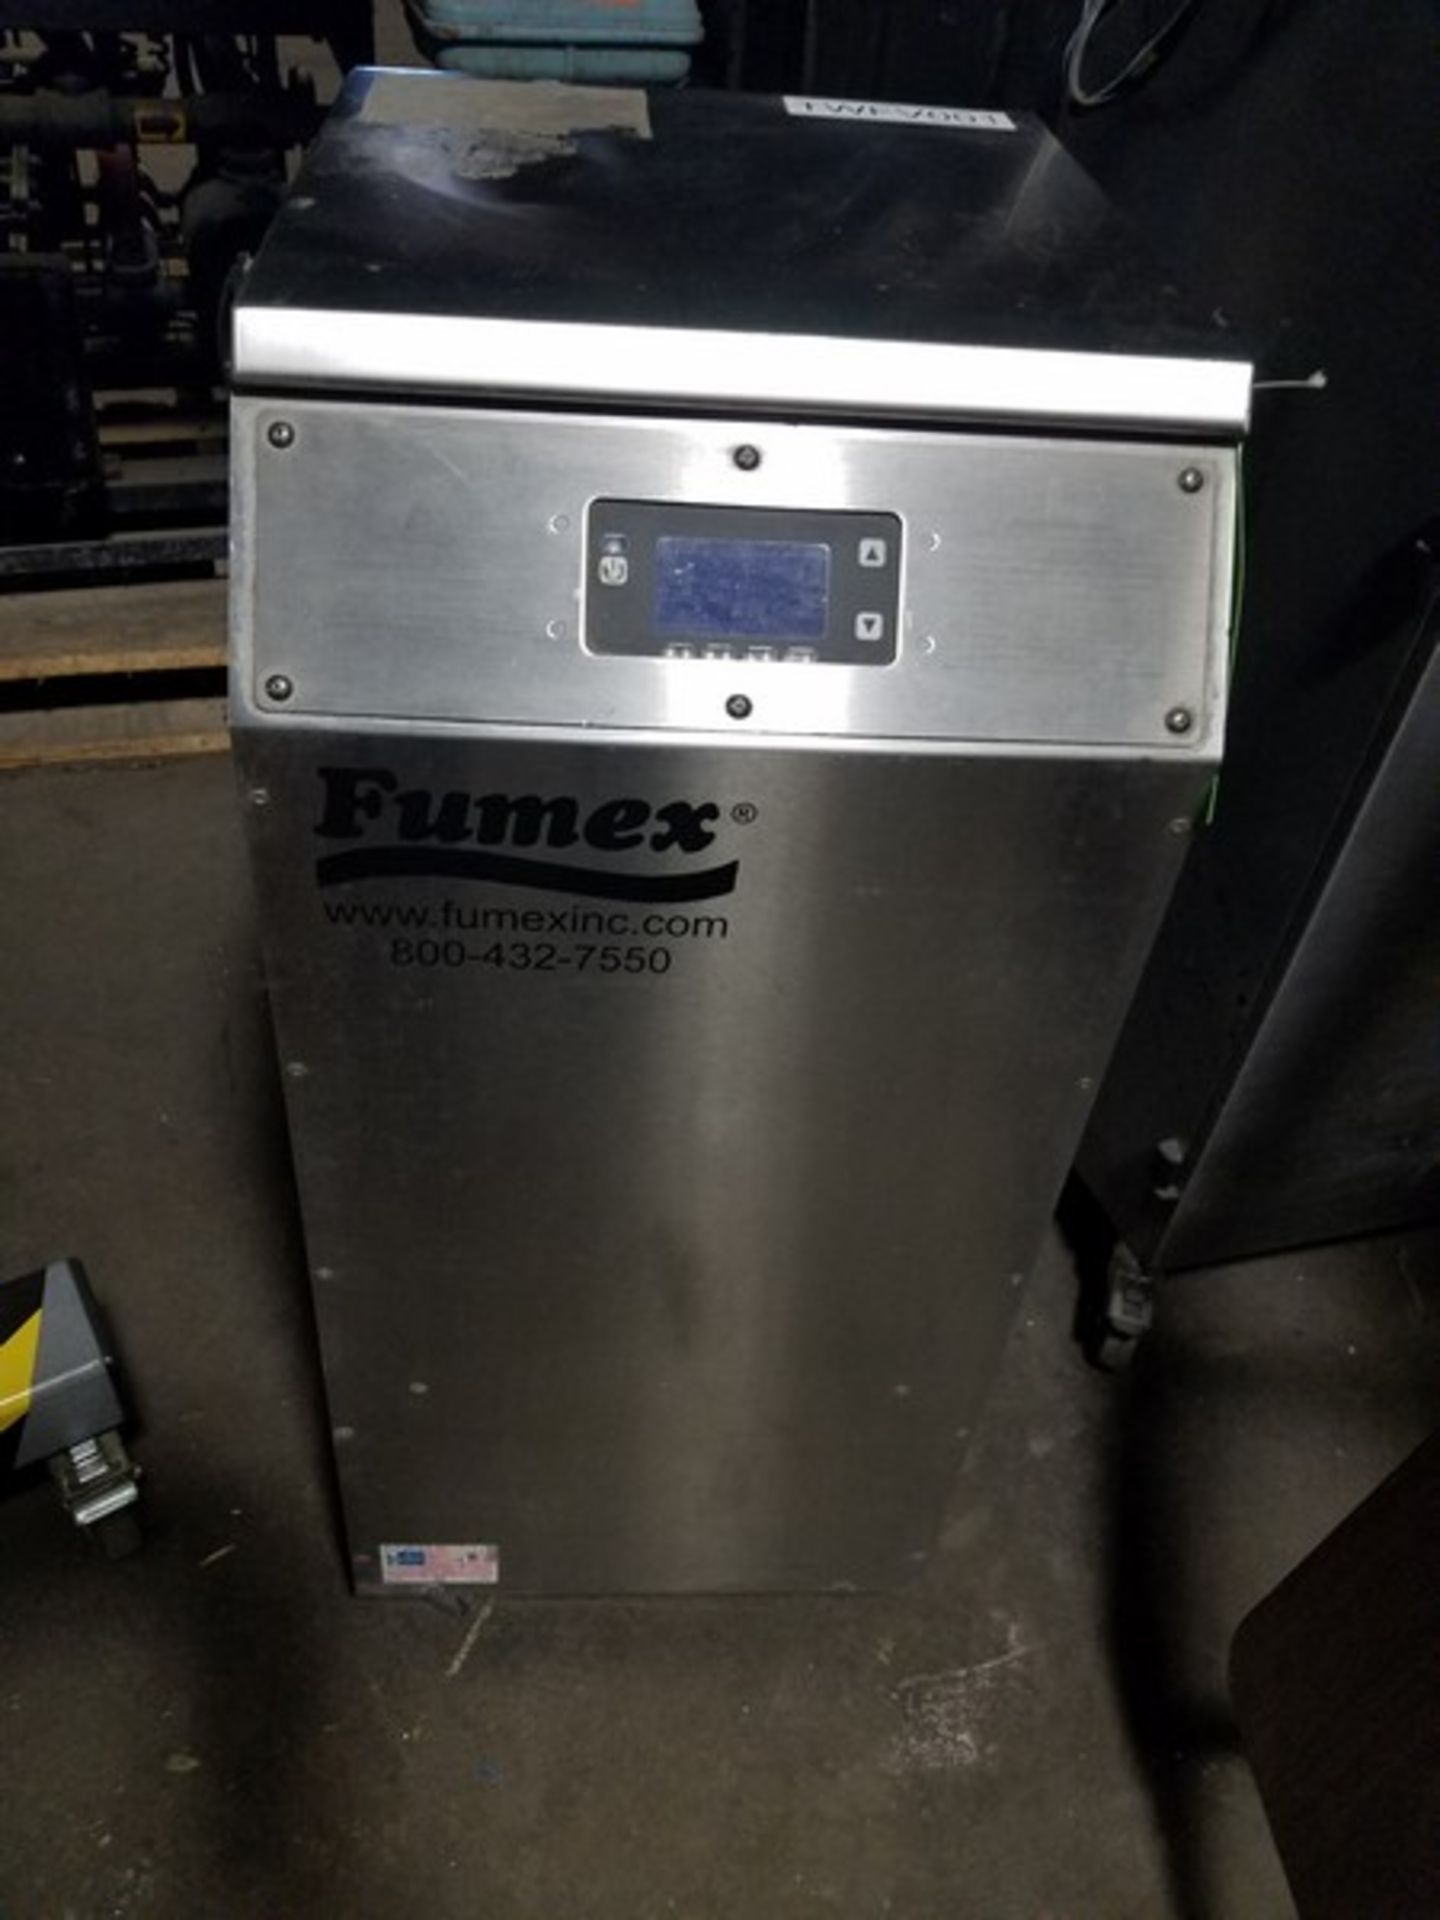 Fumex FA2SSD fume air filtration extractor, serial # 34084904, volt 120 (Handling, Loading & Site